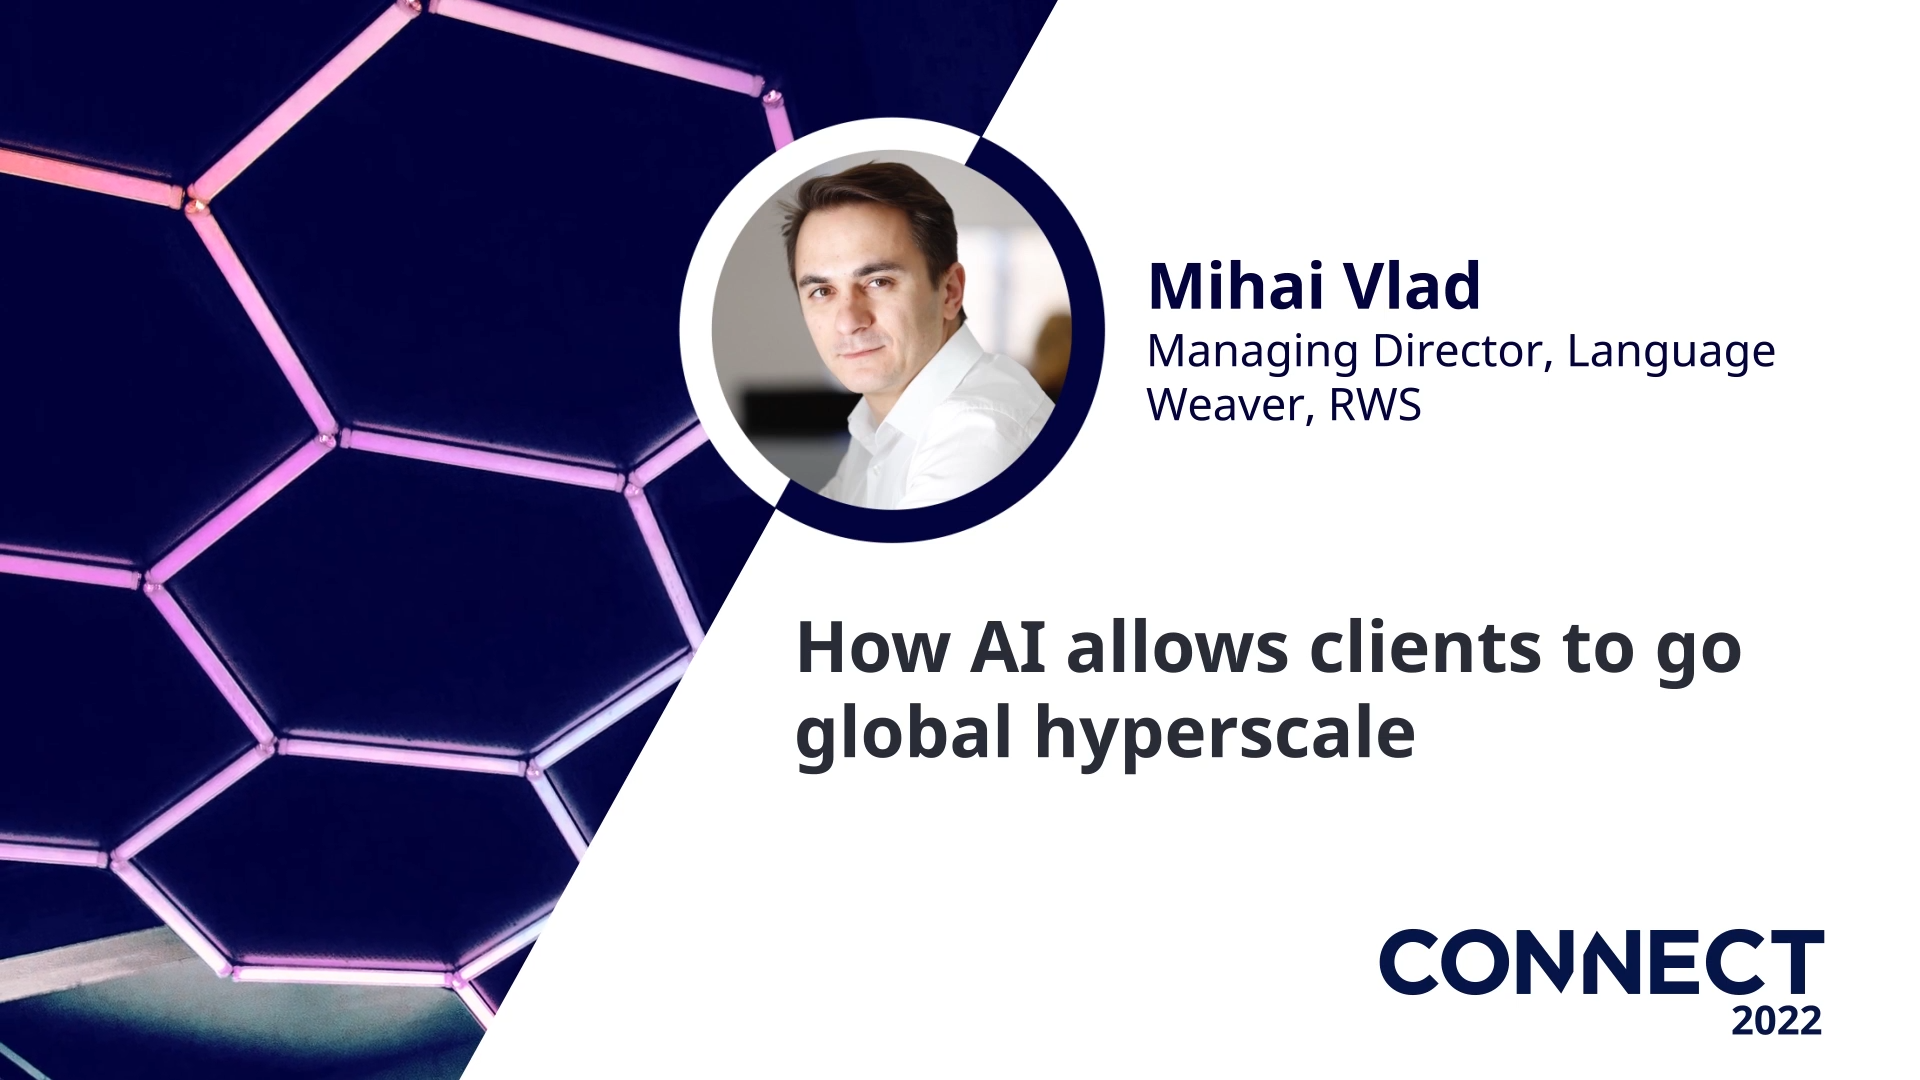 Connect 2022 - How AI allows clients to go global hyperscale